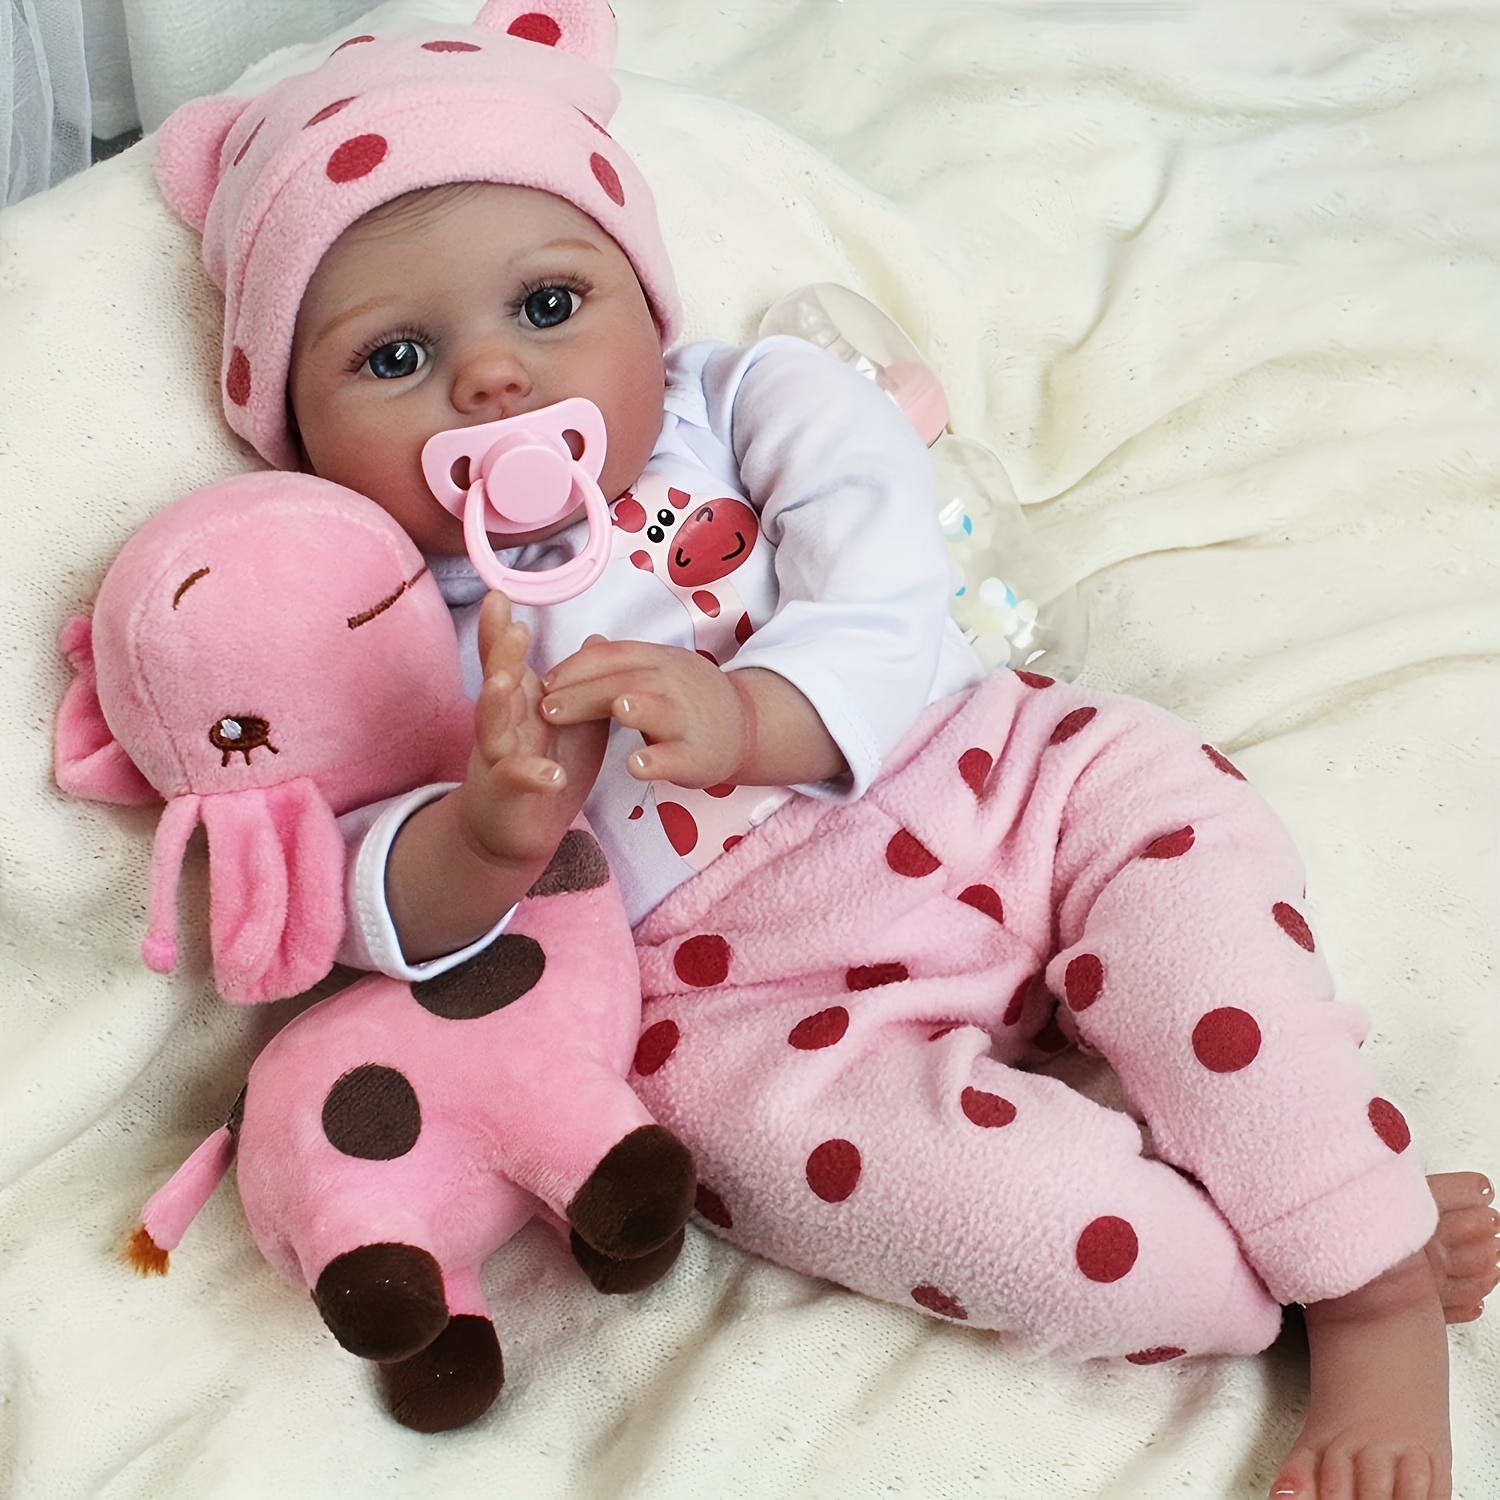 Reborn Baby Dolls - 22 Inches Realistic Newborn Soft Vinyl Baby Dolls Toy  For Kids Easter Gift